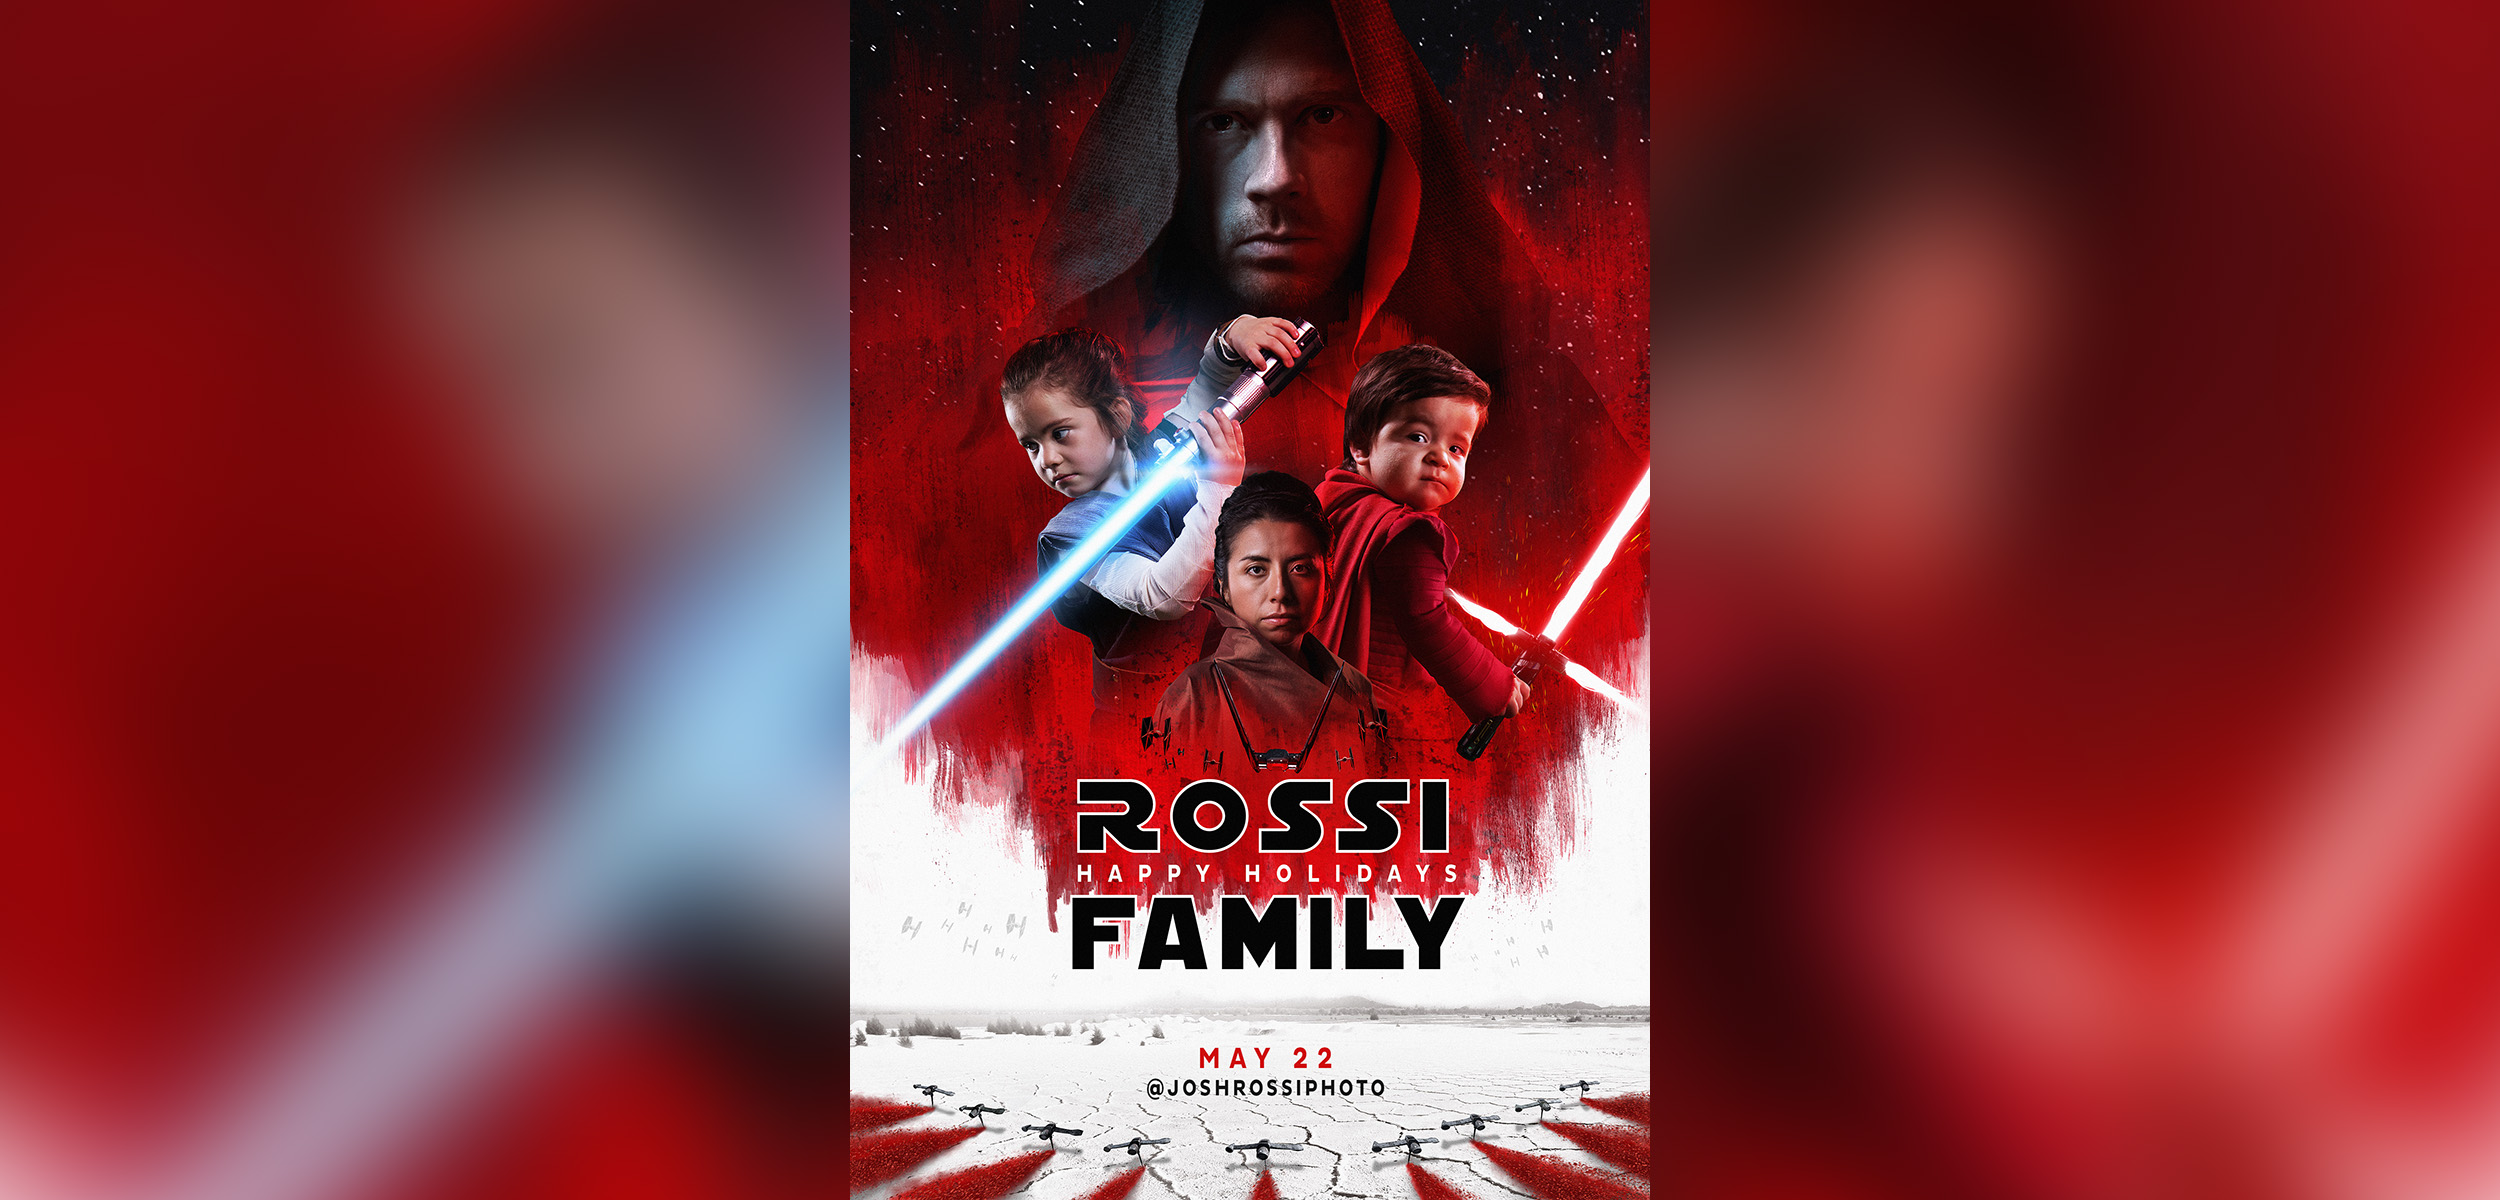 PHOTO: Photographer Josh Rossi of Salt Lake City re-created "The Last Jedi" movie posters with his wife and two children.